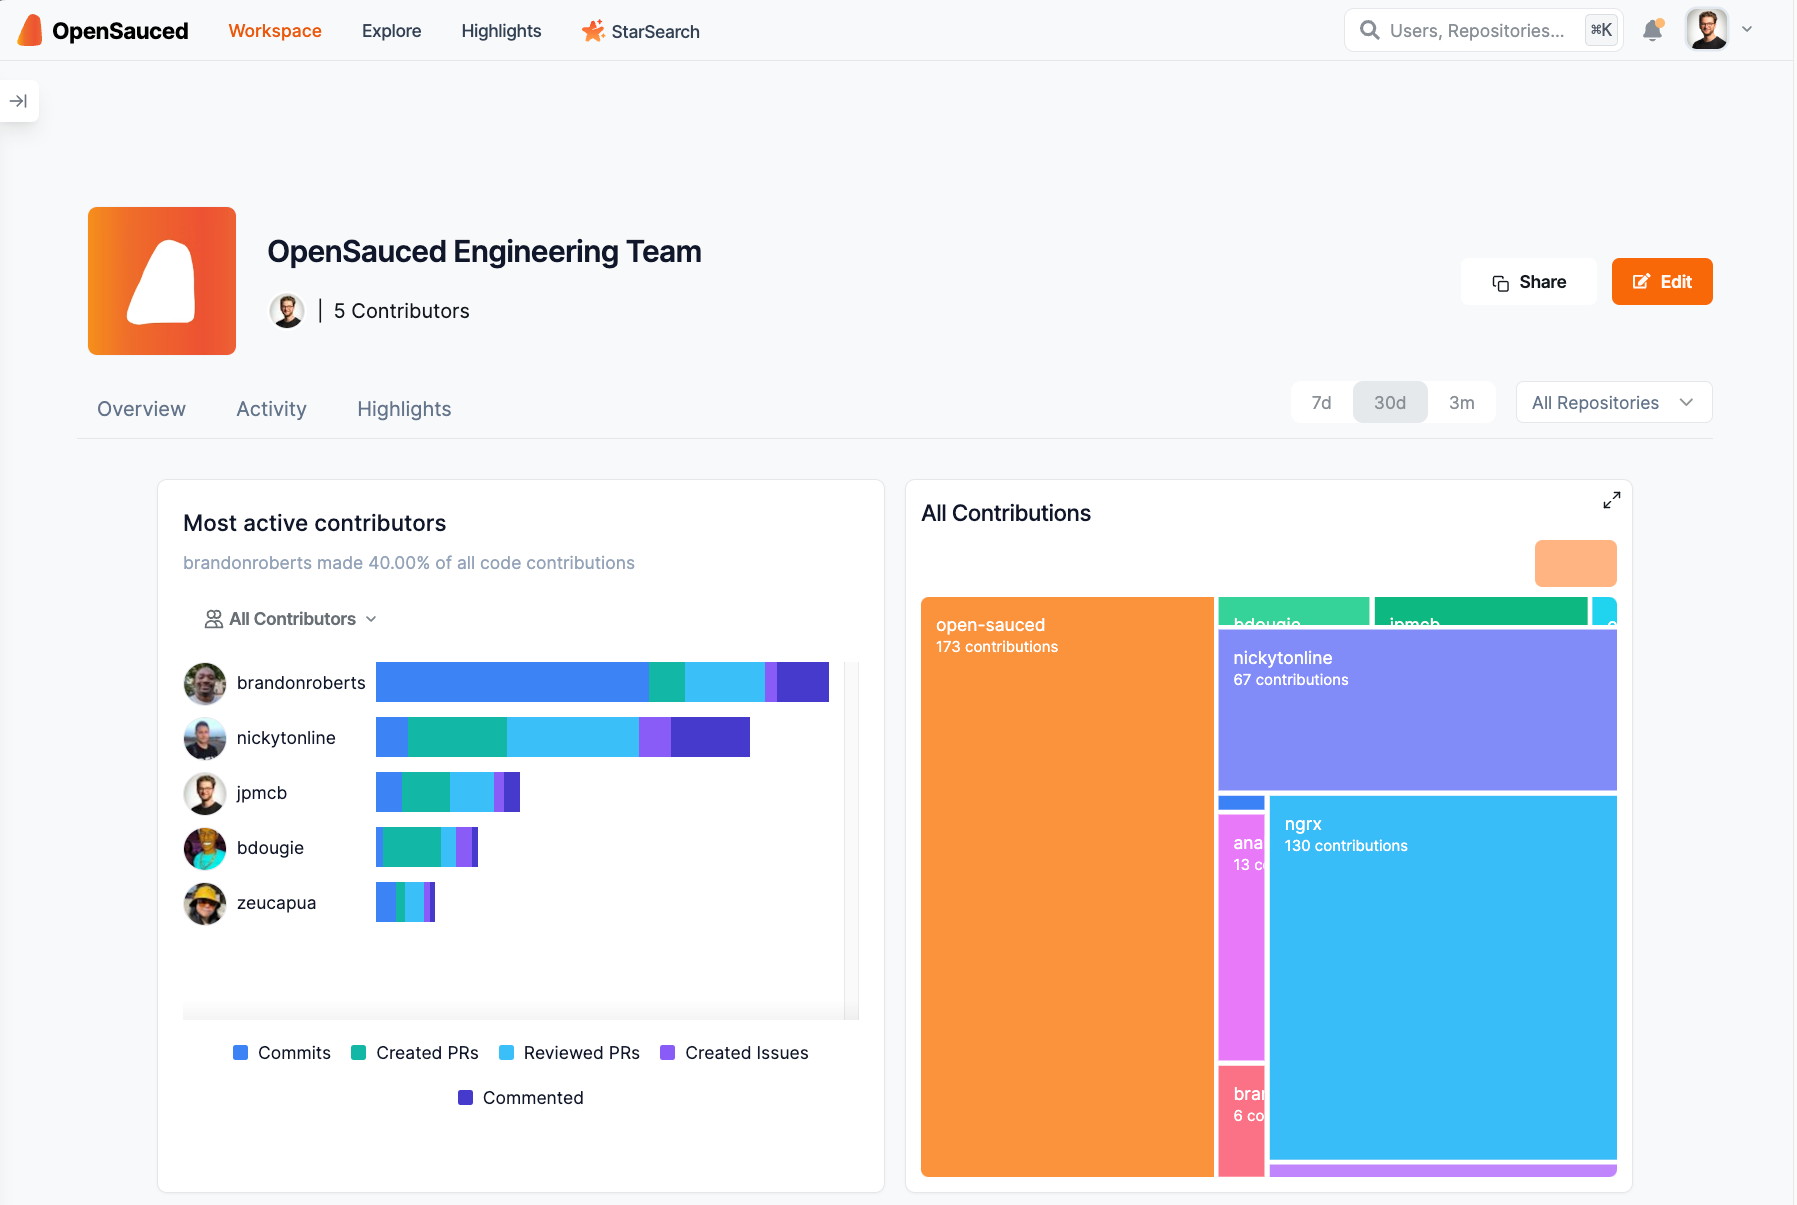 The OpenSauced Engineering Team page showing the most active contributors and all contributions